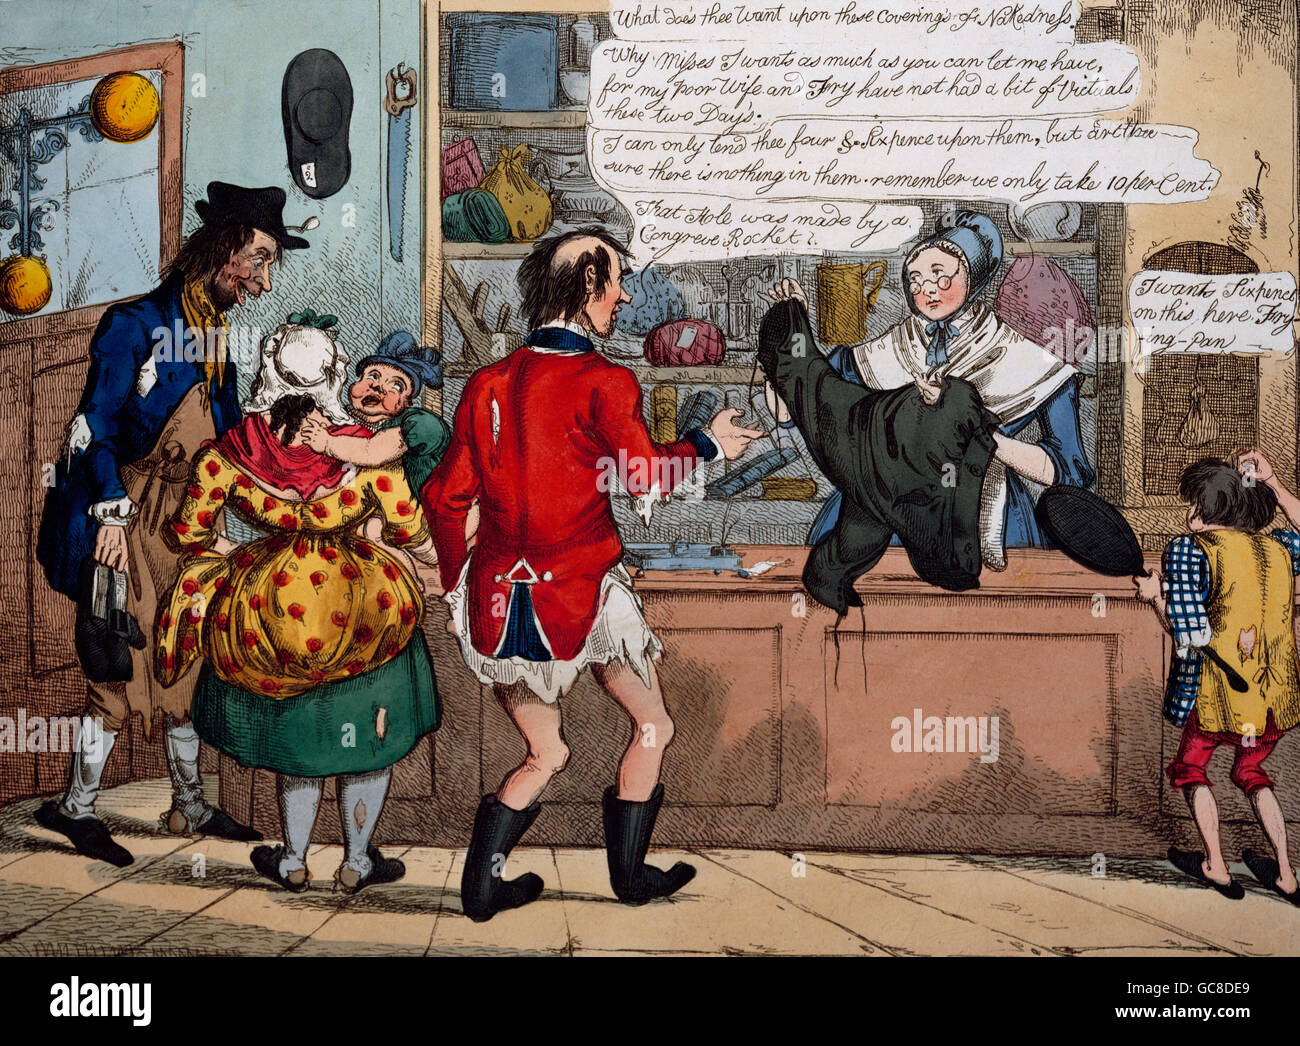 money, pawnshop, caricature, 'The new Combination Pawn Broking Company', aquatinta, S.W. Fores, London, 1824, Munich Stadtmuseum, , Additional-Rights-Clearences-Not Available Stock Photo